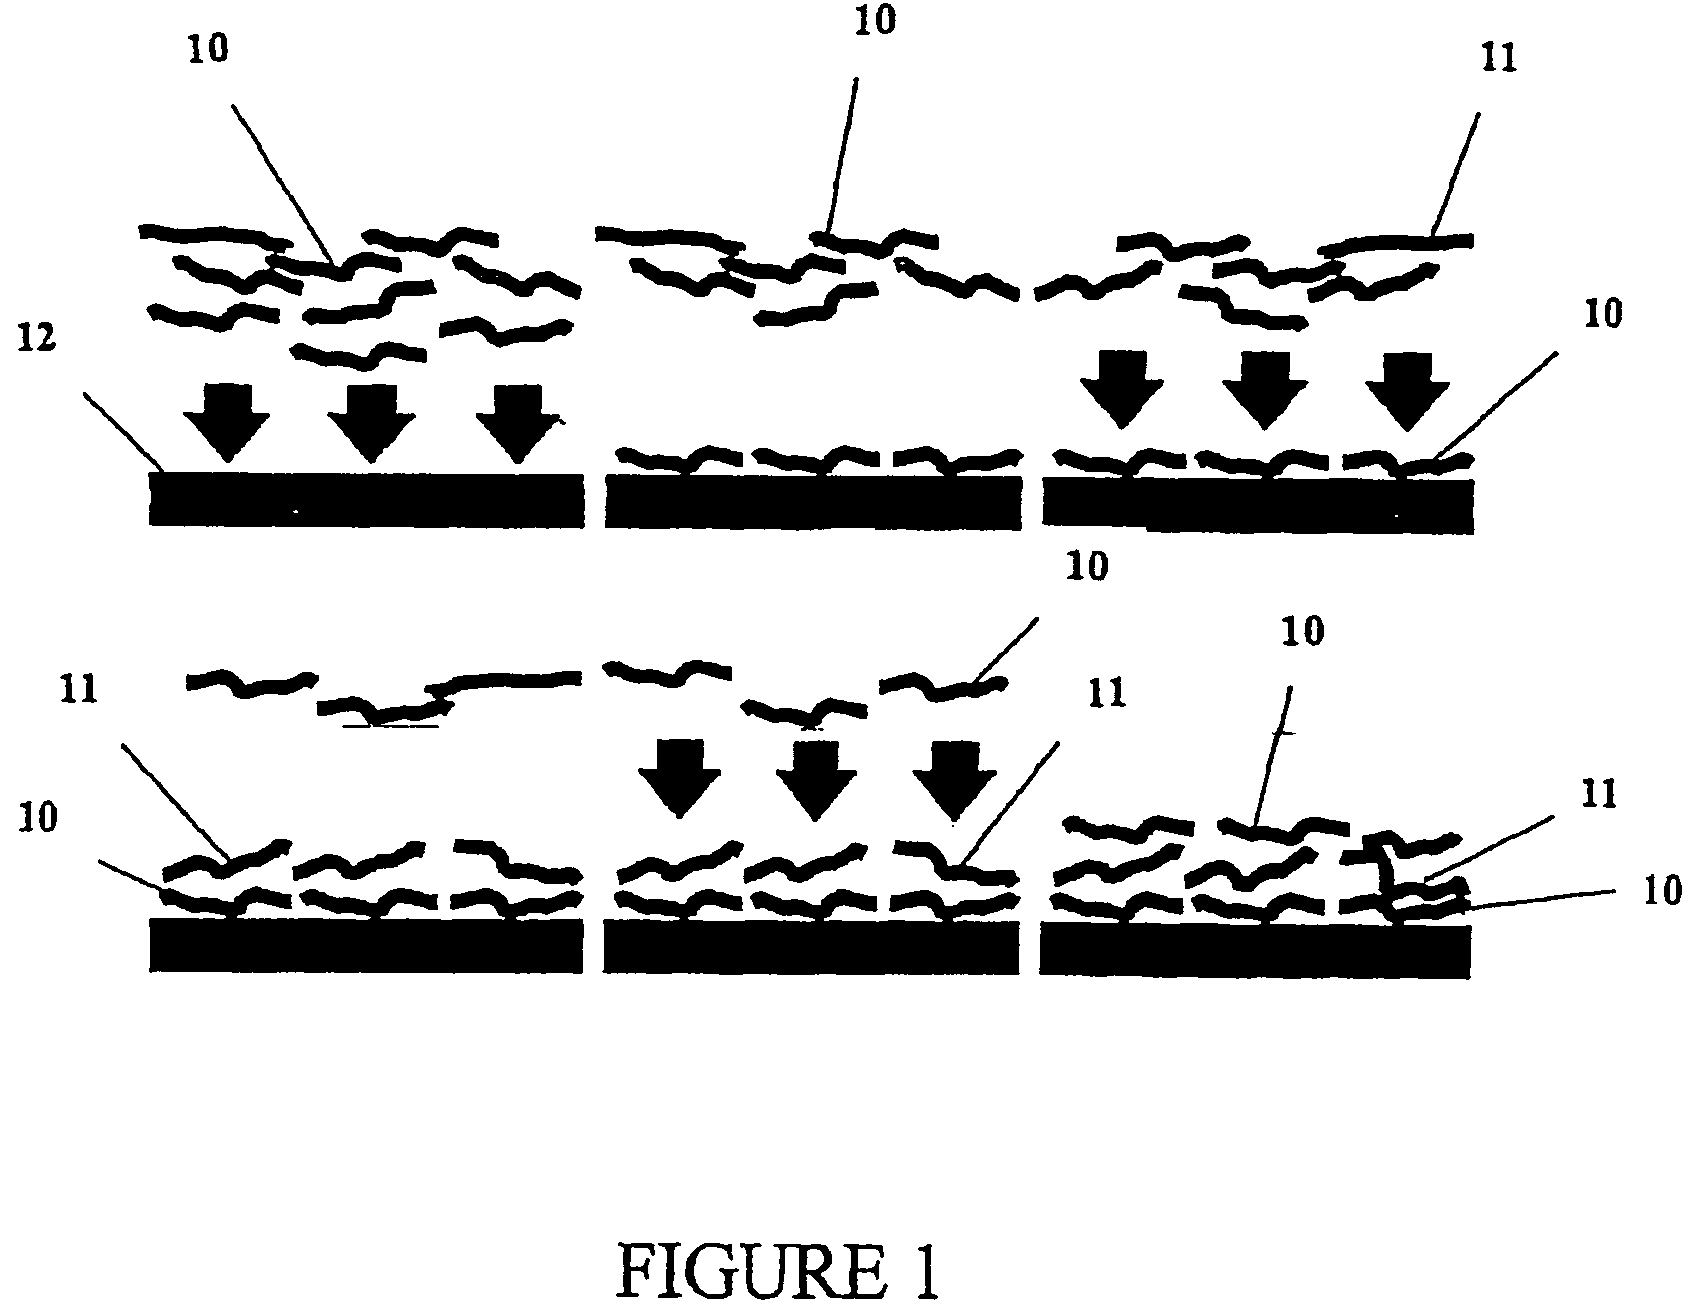 Multilayer films, coatings, and microcapsules comprising polypeptides